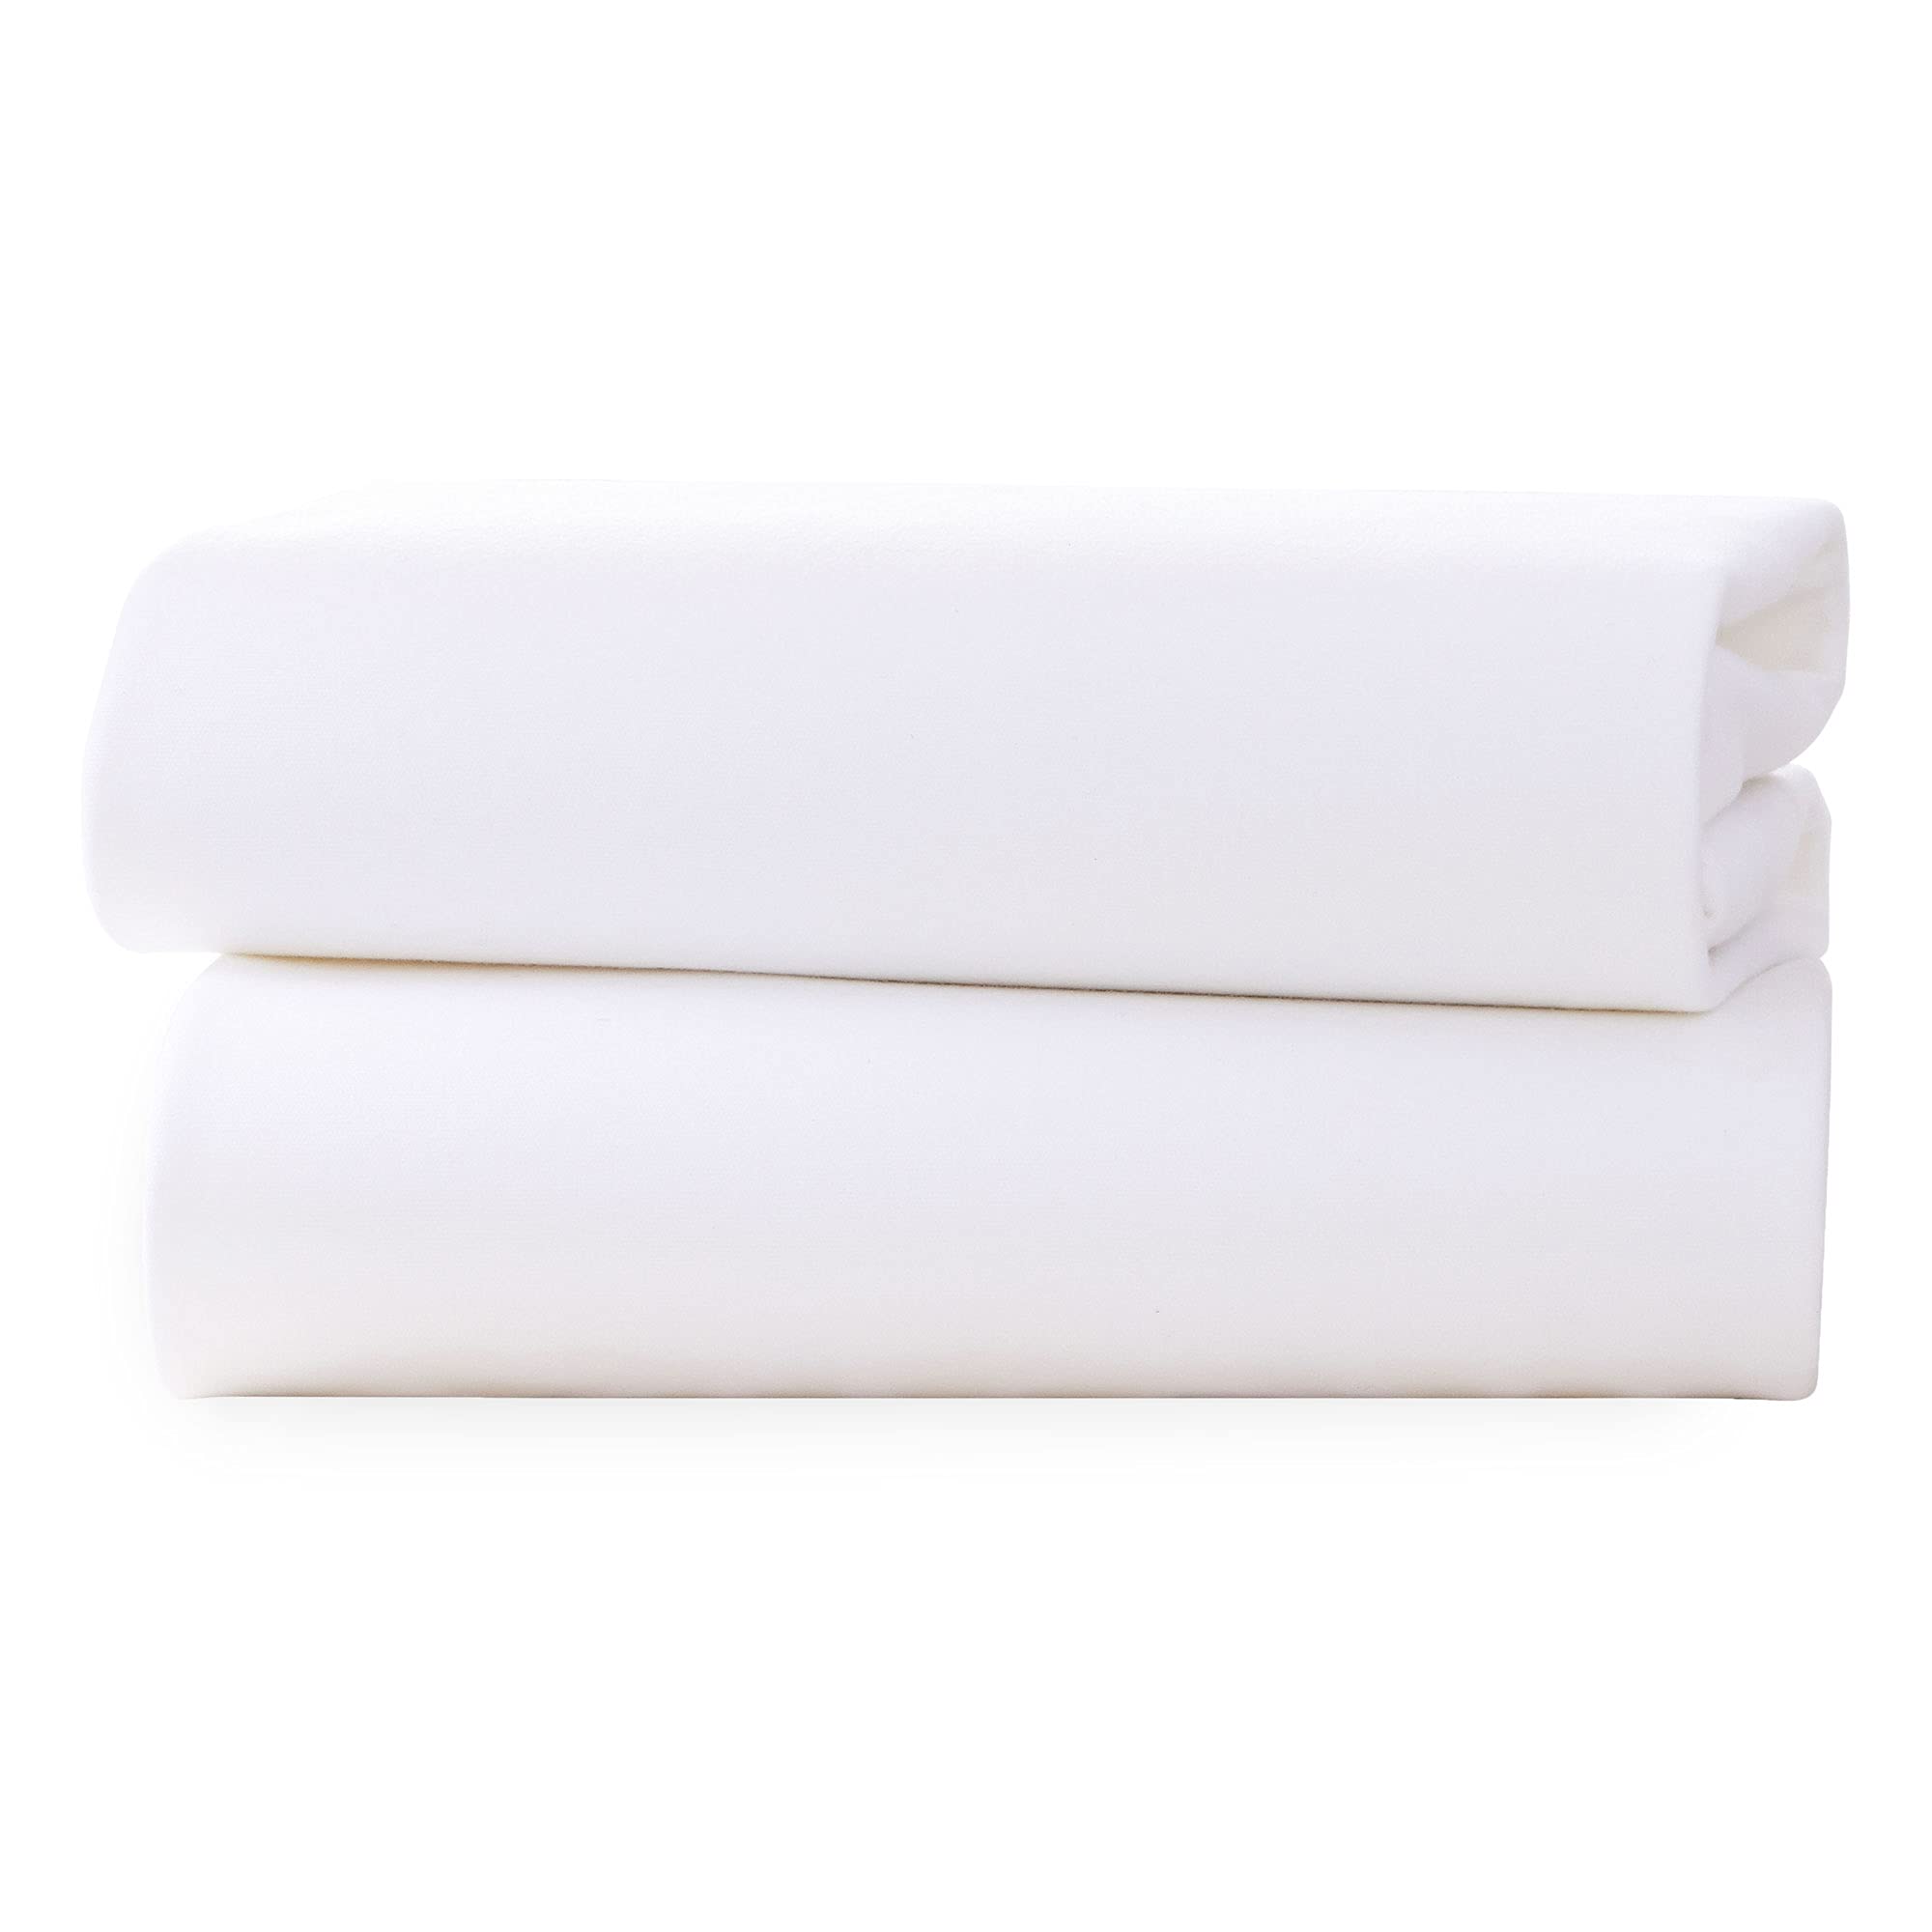 Clair de Lune Cot Fitted Sheets 120 x 60 cm 100% Soft Cotton Jersey (White, Pack of 2)